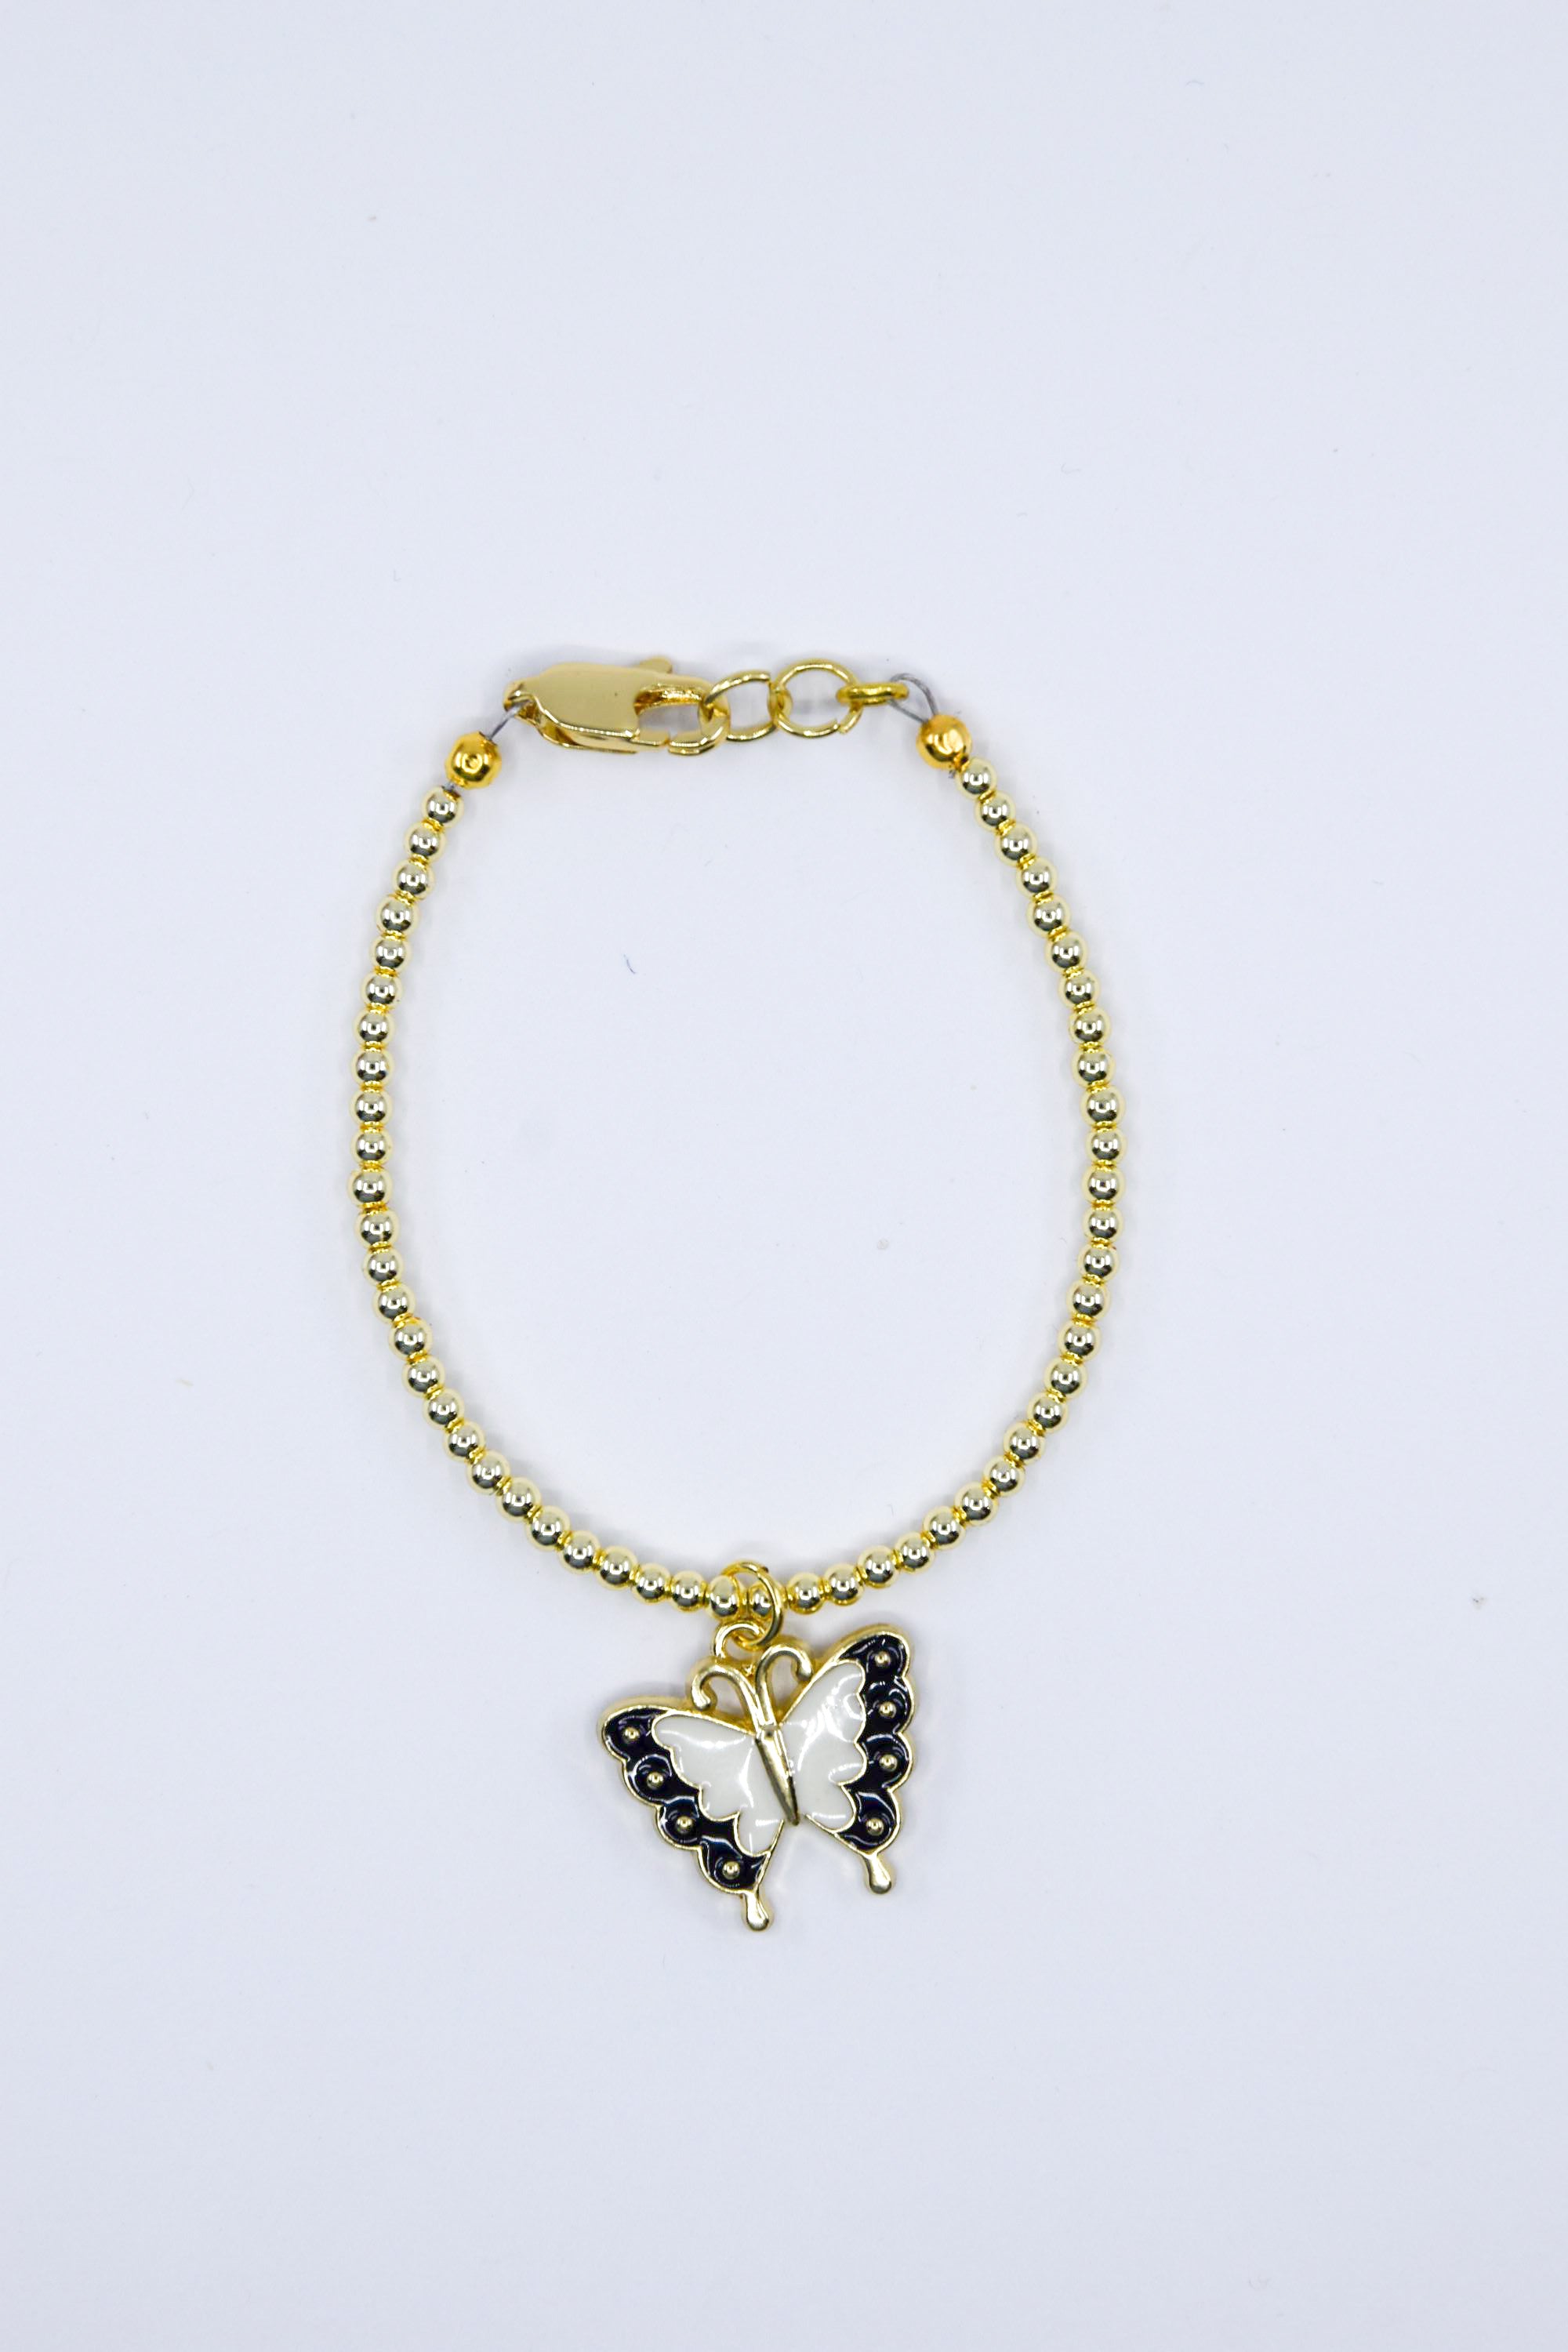 Black and White Butterfly Charm Bracelet